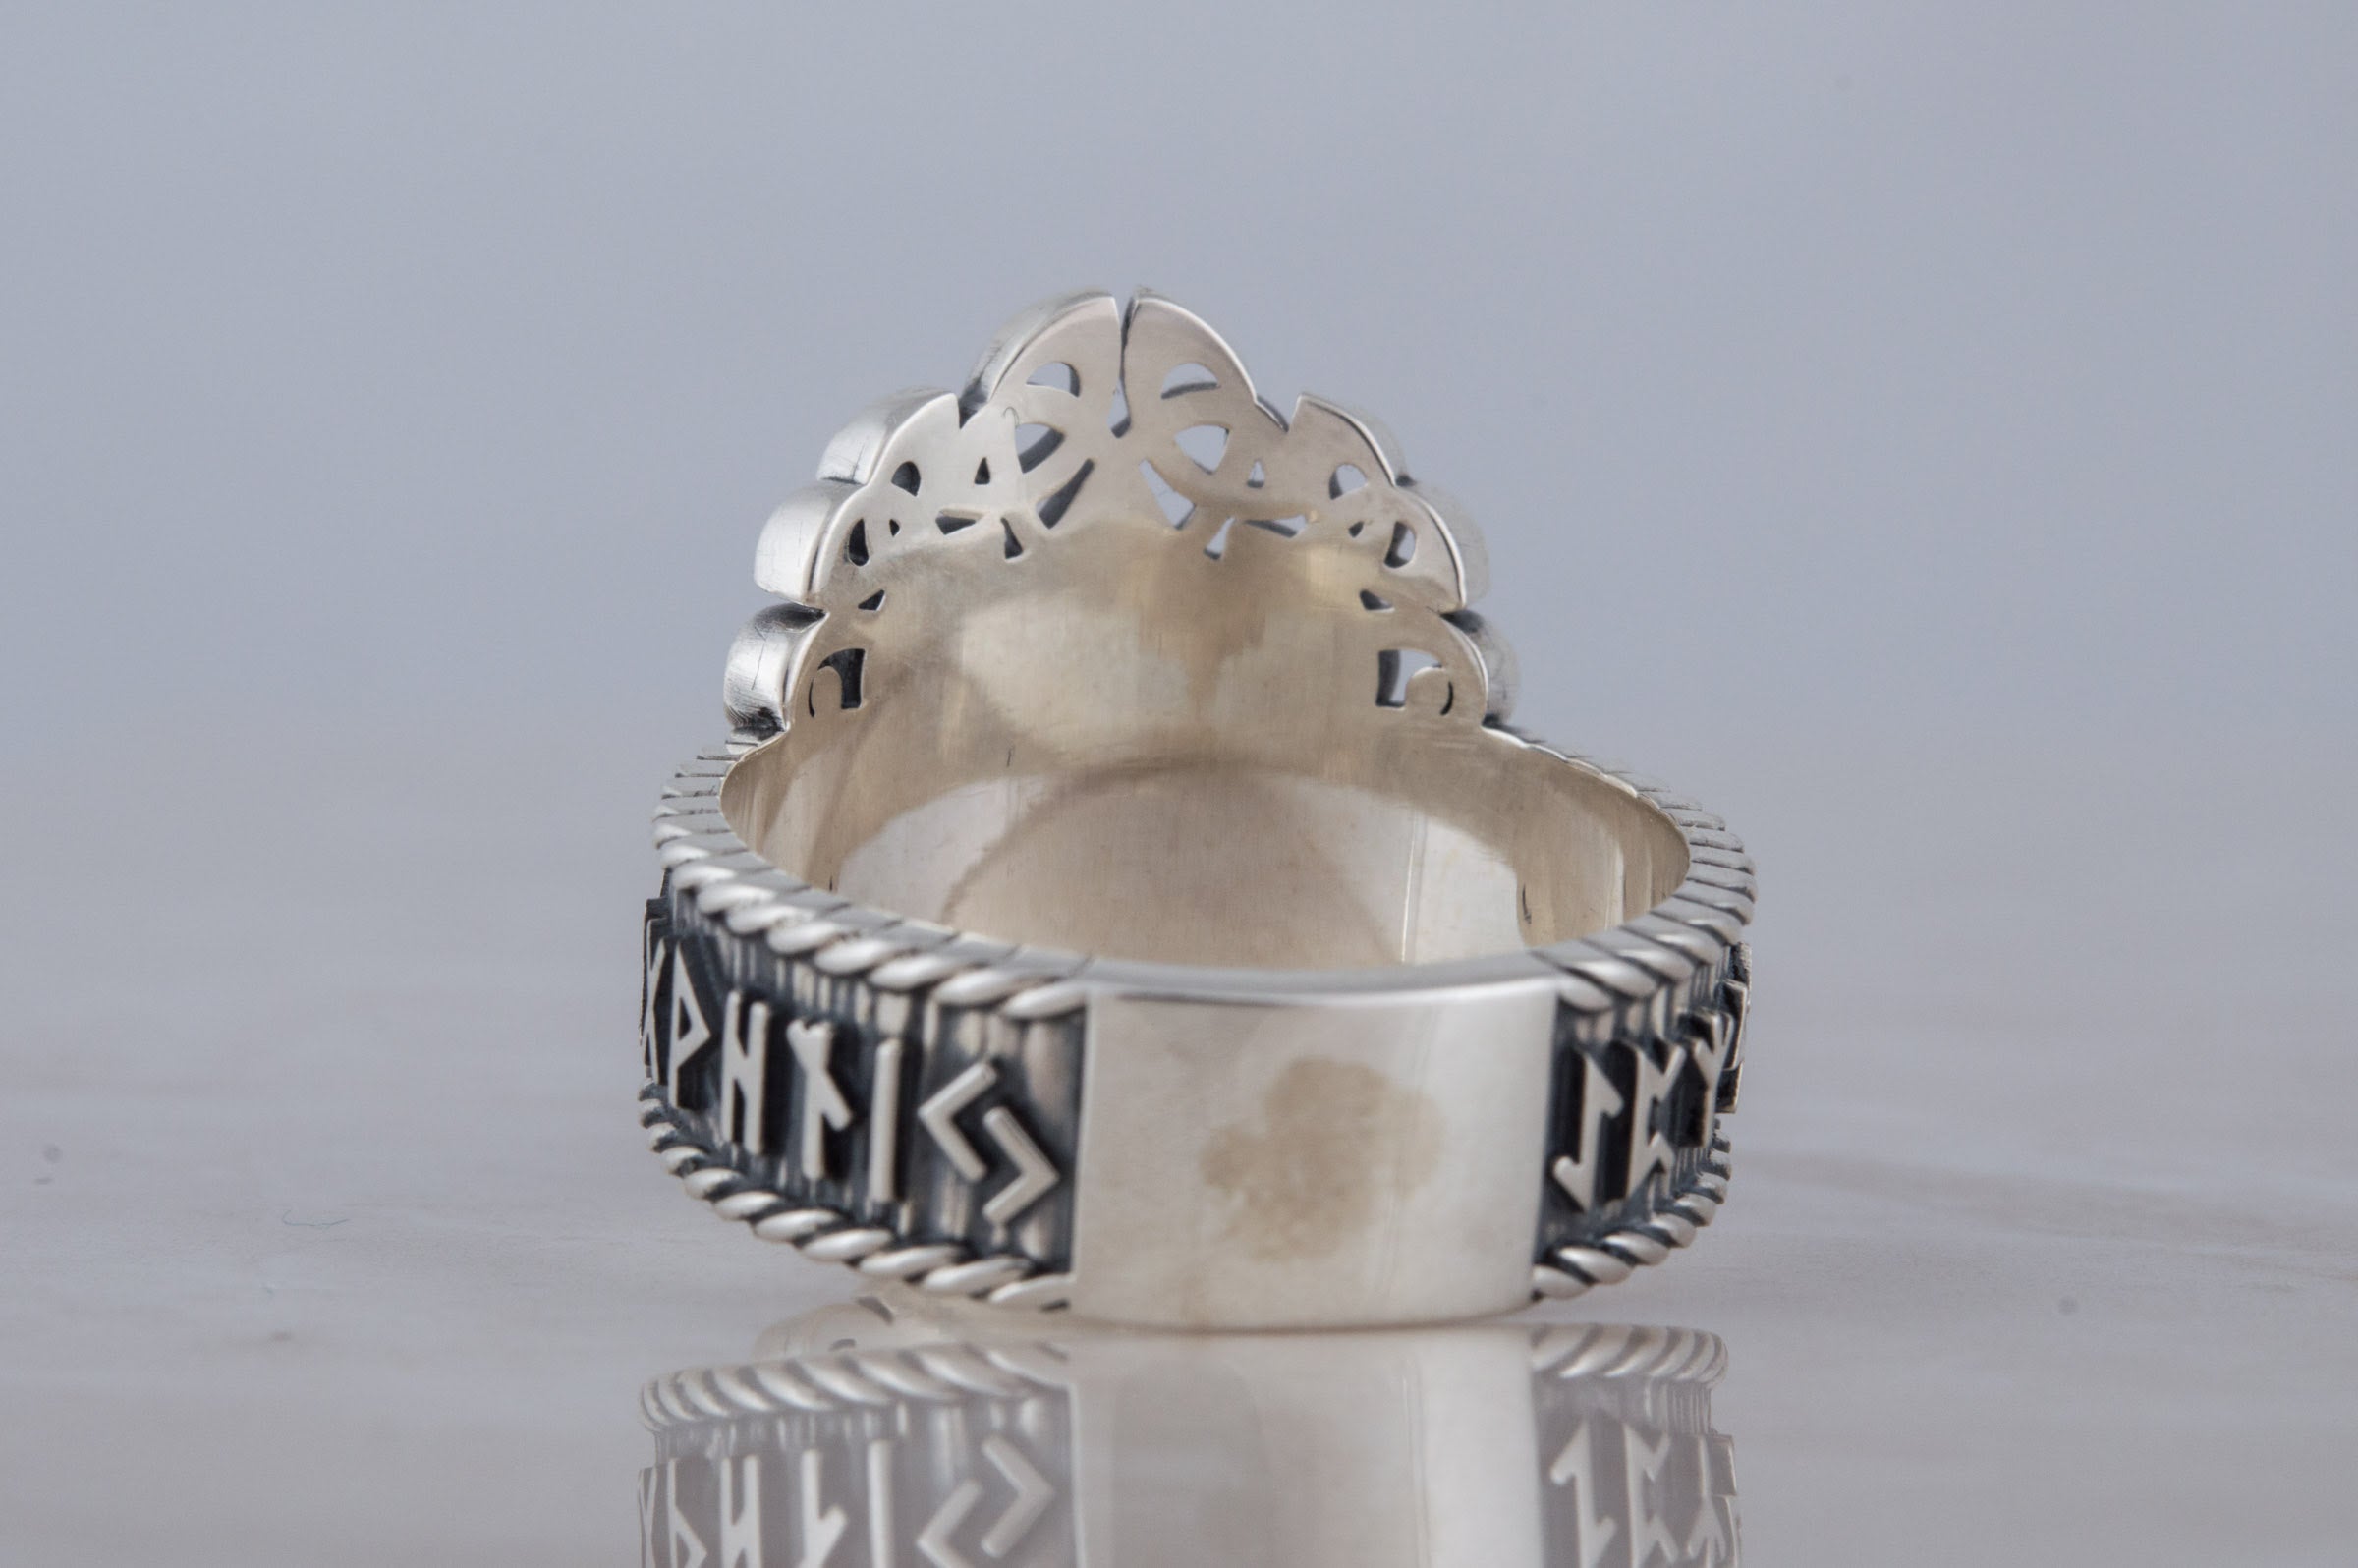 Yggdrasil Symbol Ring with Norse Runes Ornament Sterling Silver Viking Jewelry - vikingworkshop